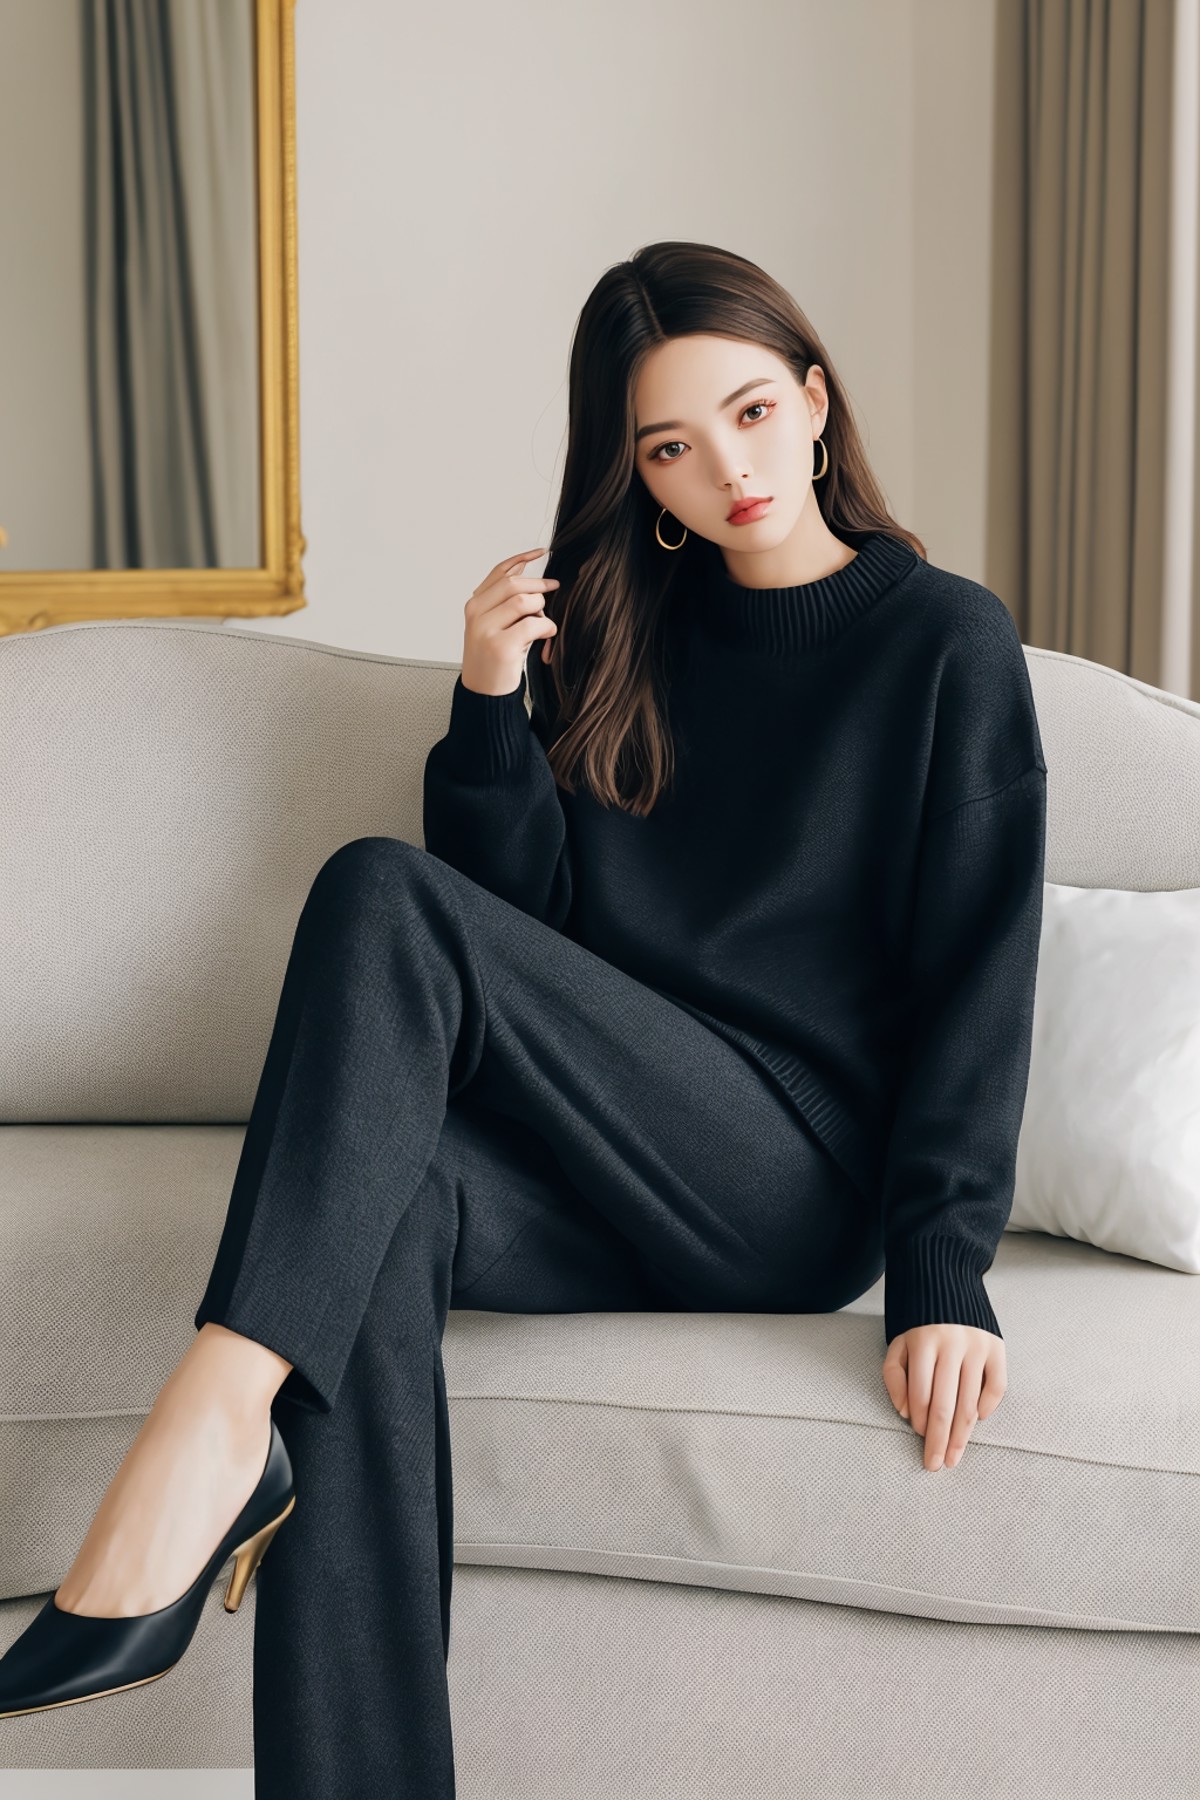 women sitting in a luxurious room wearing sweater and long pants